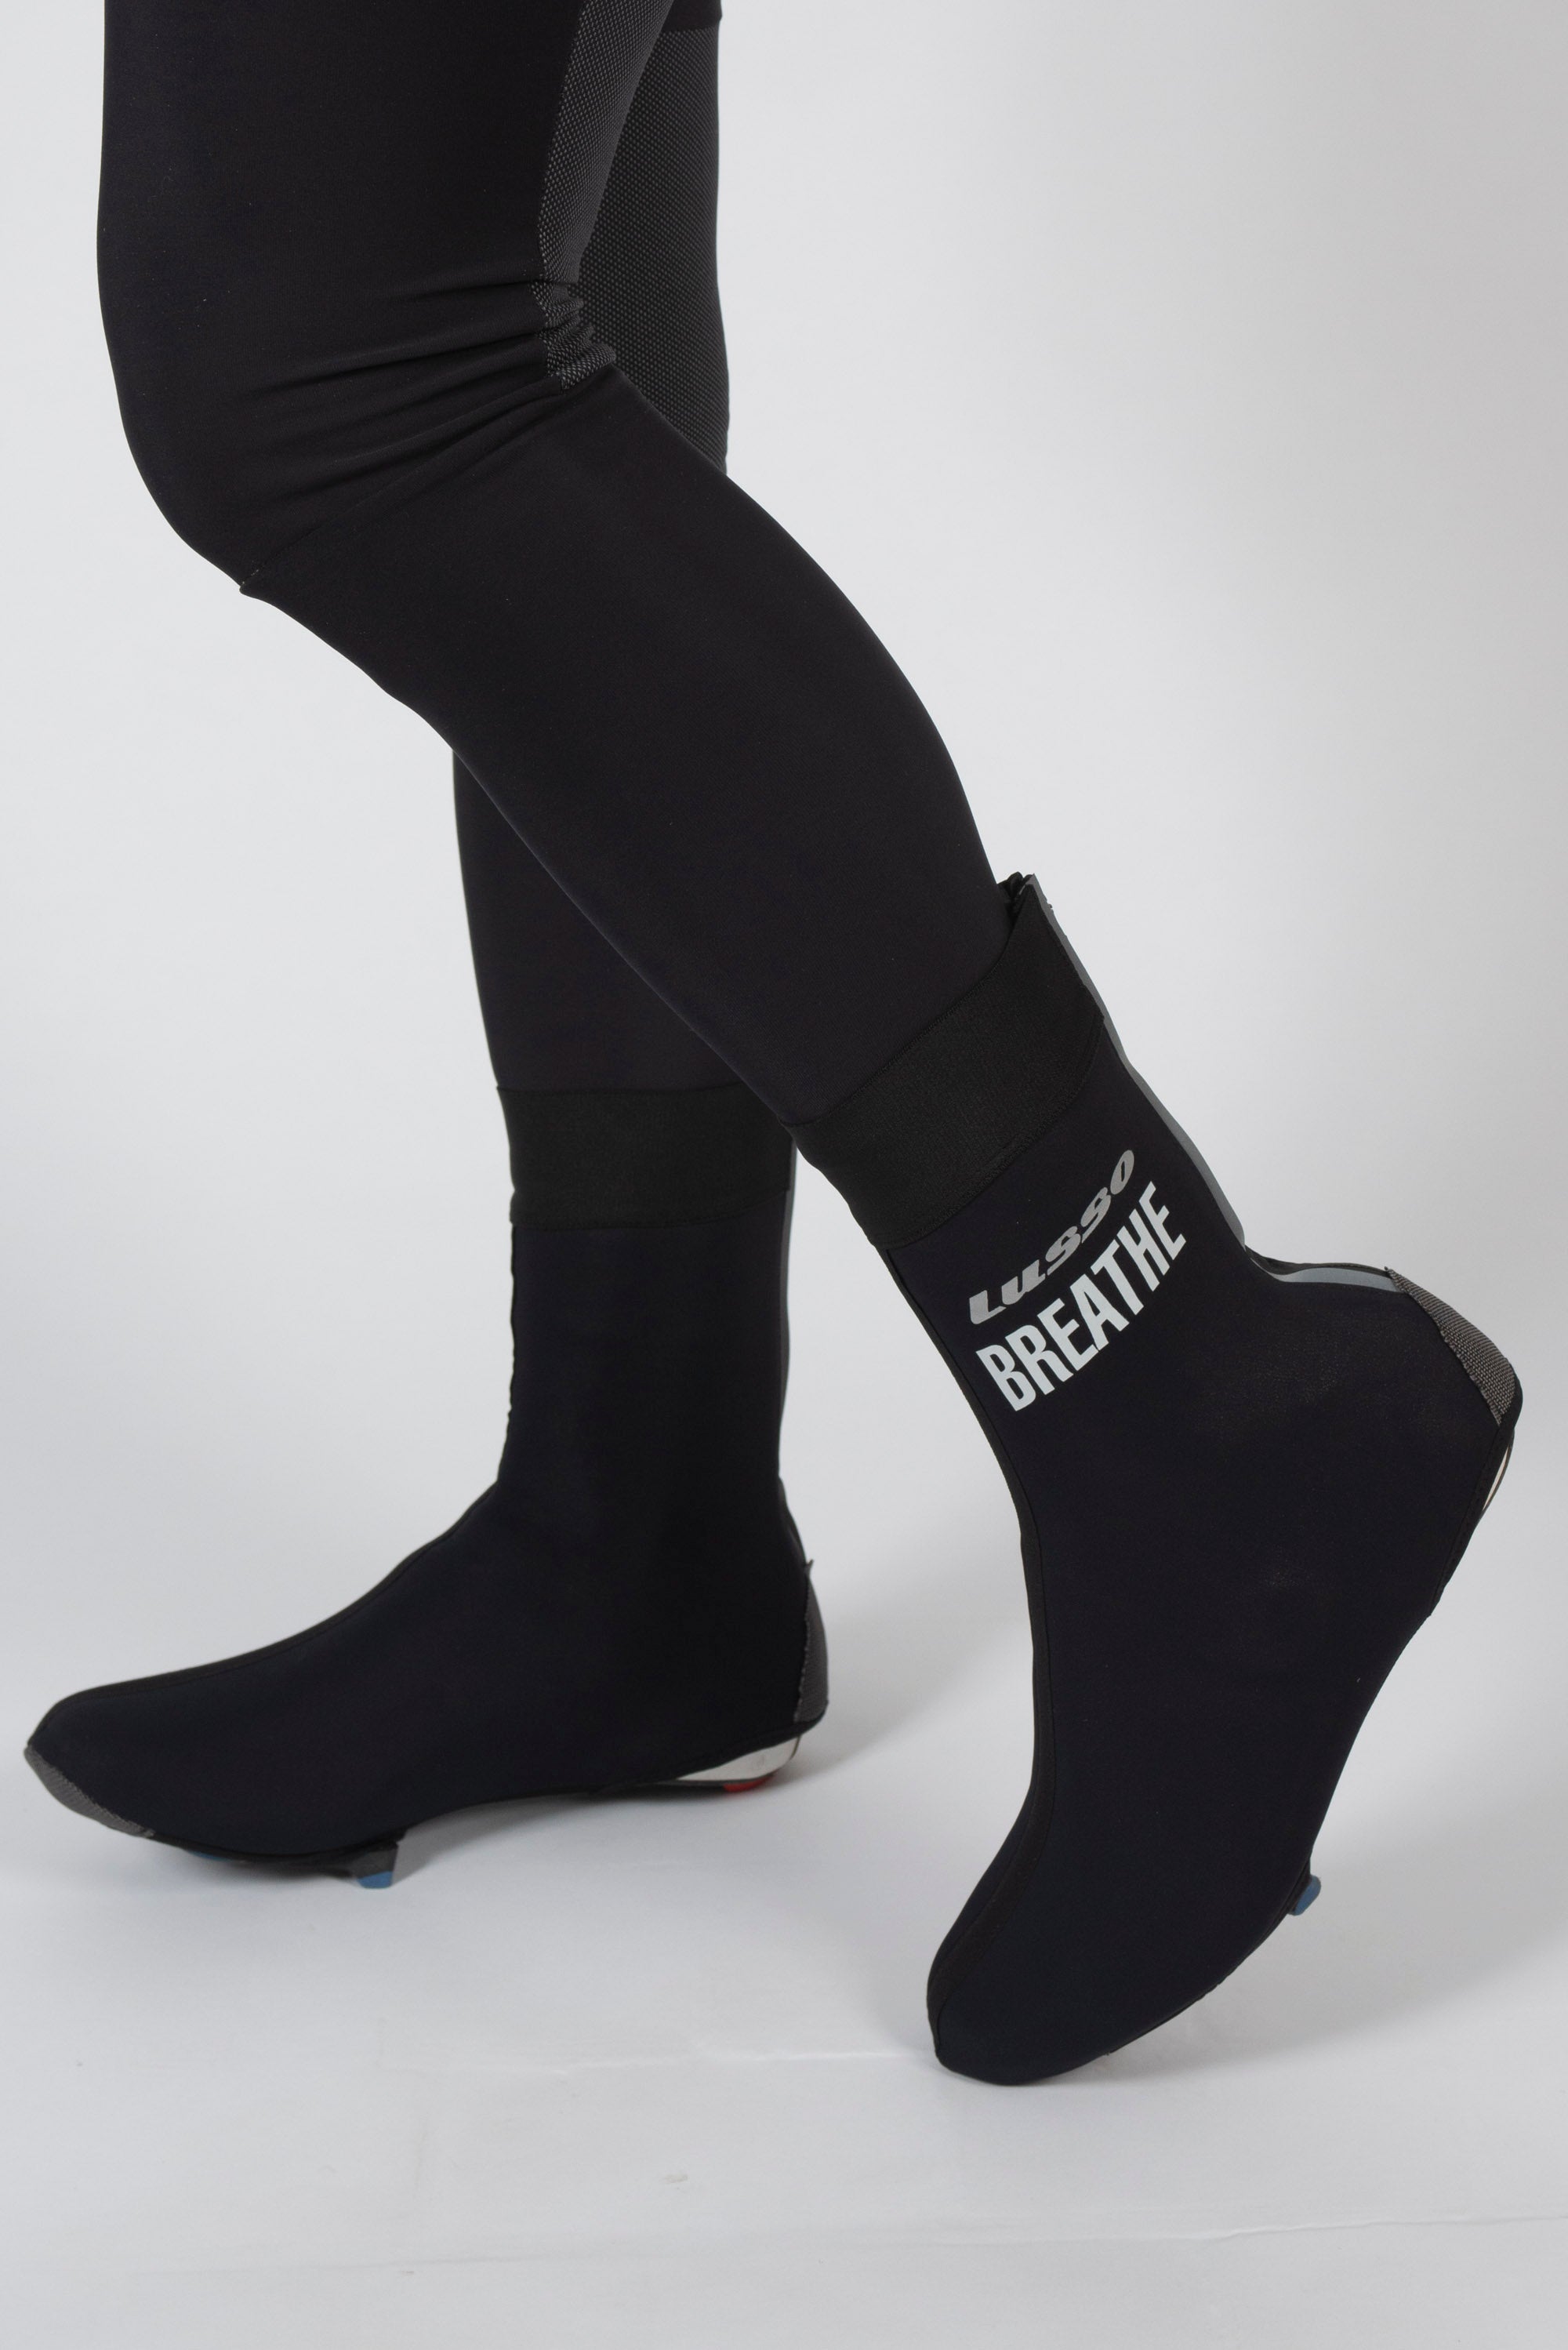 Breathe Overshoes – Lusso Cycle Wear